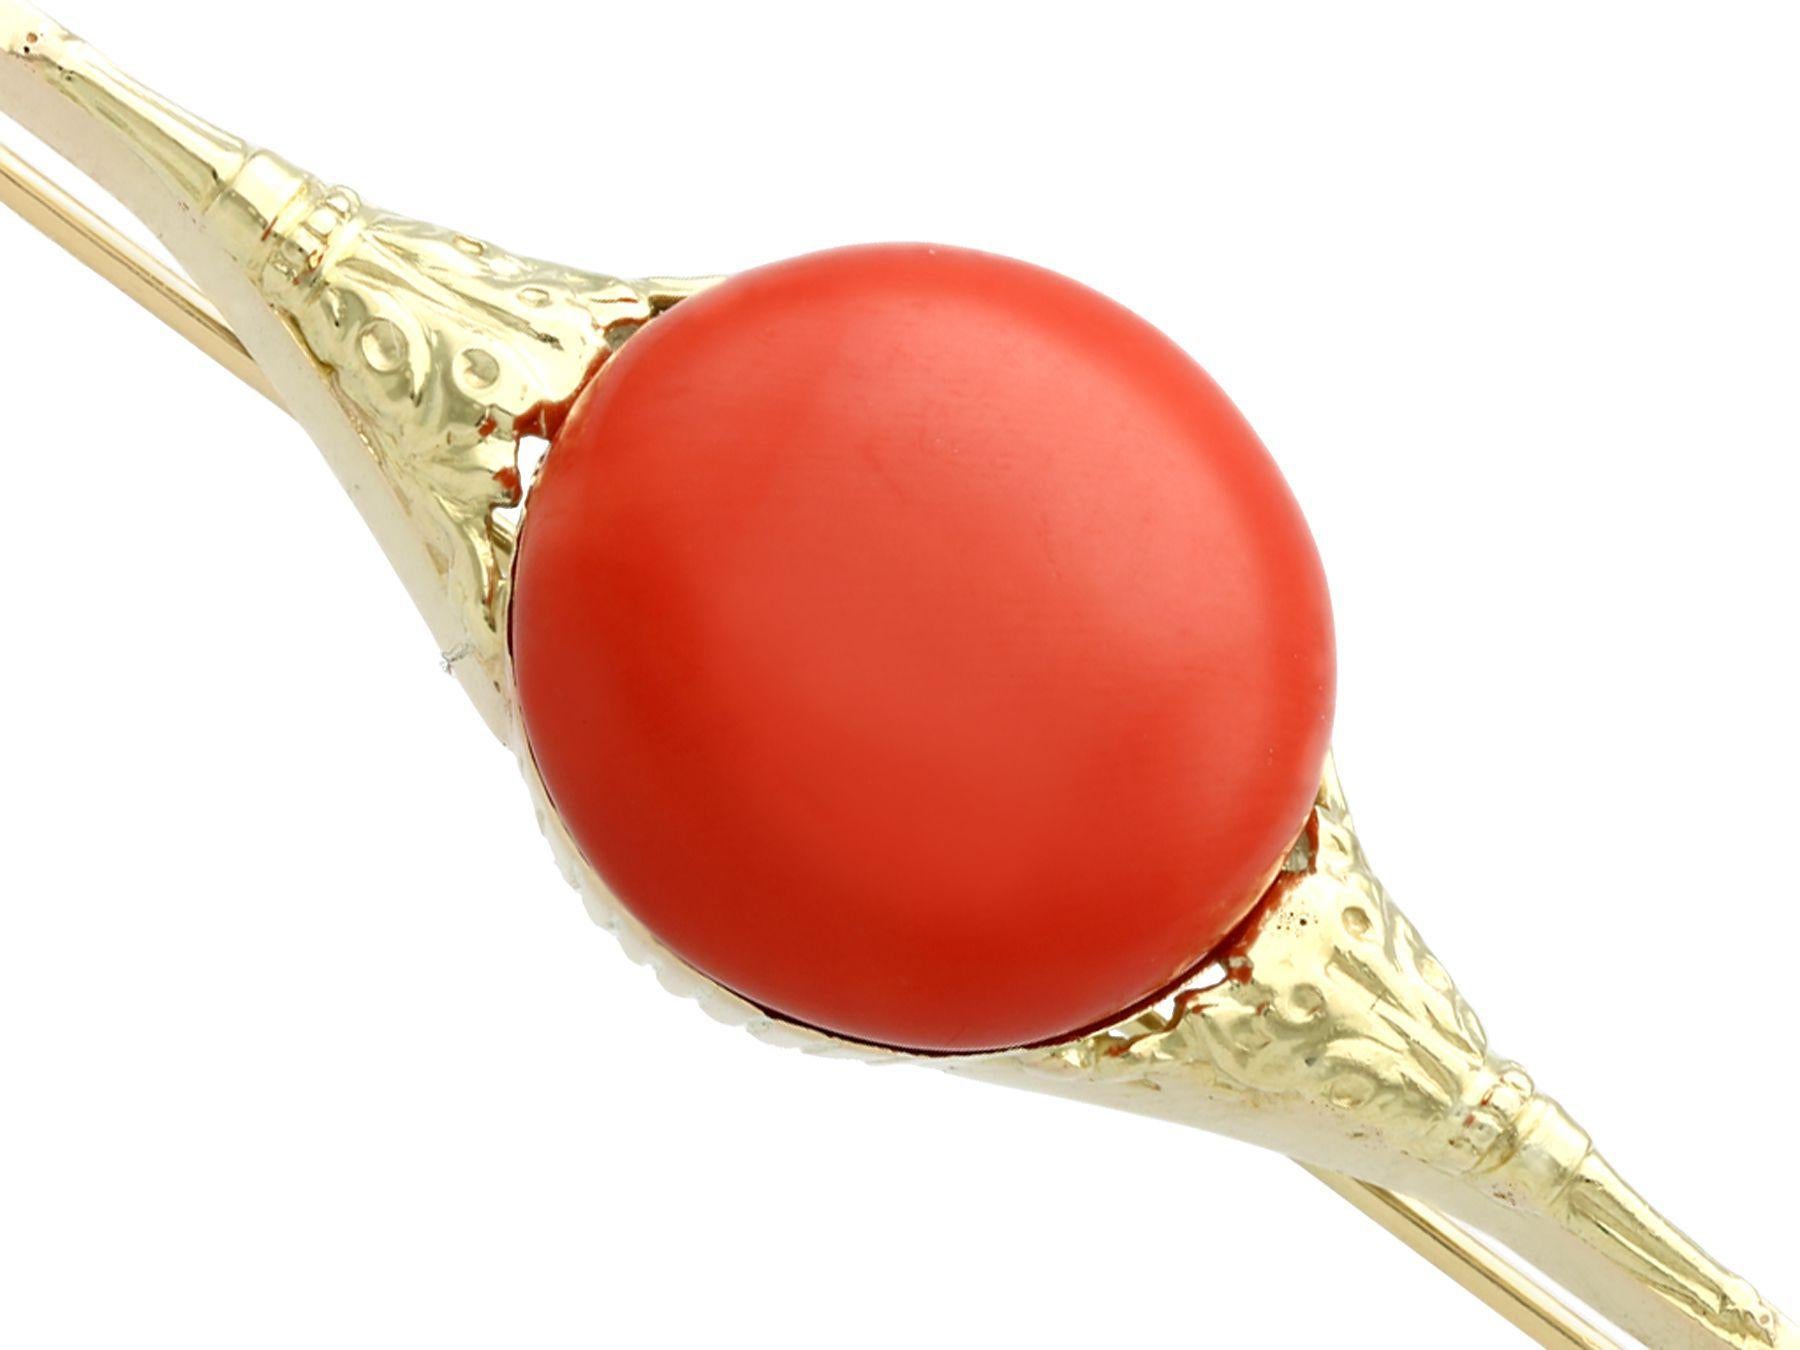 A fine and impressive antique 9.51 carat coral and 14 karat yellow gold bar brooch; part of our antique estate jewelry collections.

This impressive antique cabochon cut coral brooch has been crafted in 14k yellow.

The antique brooch features a